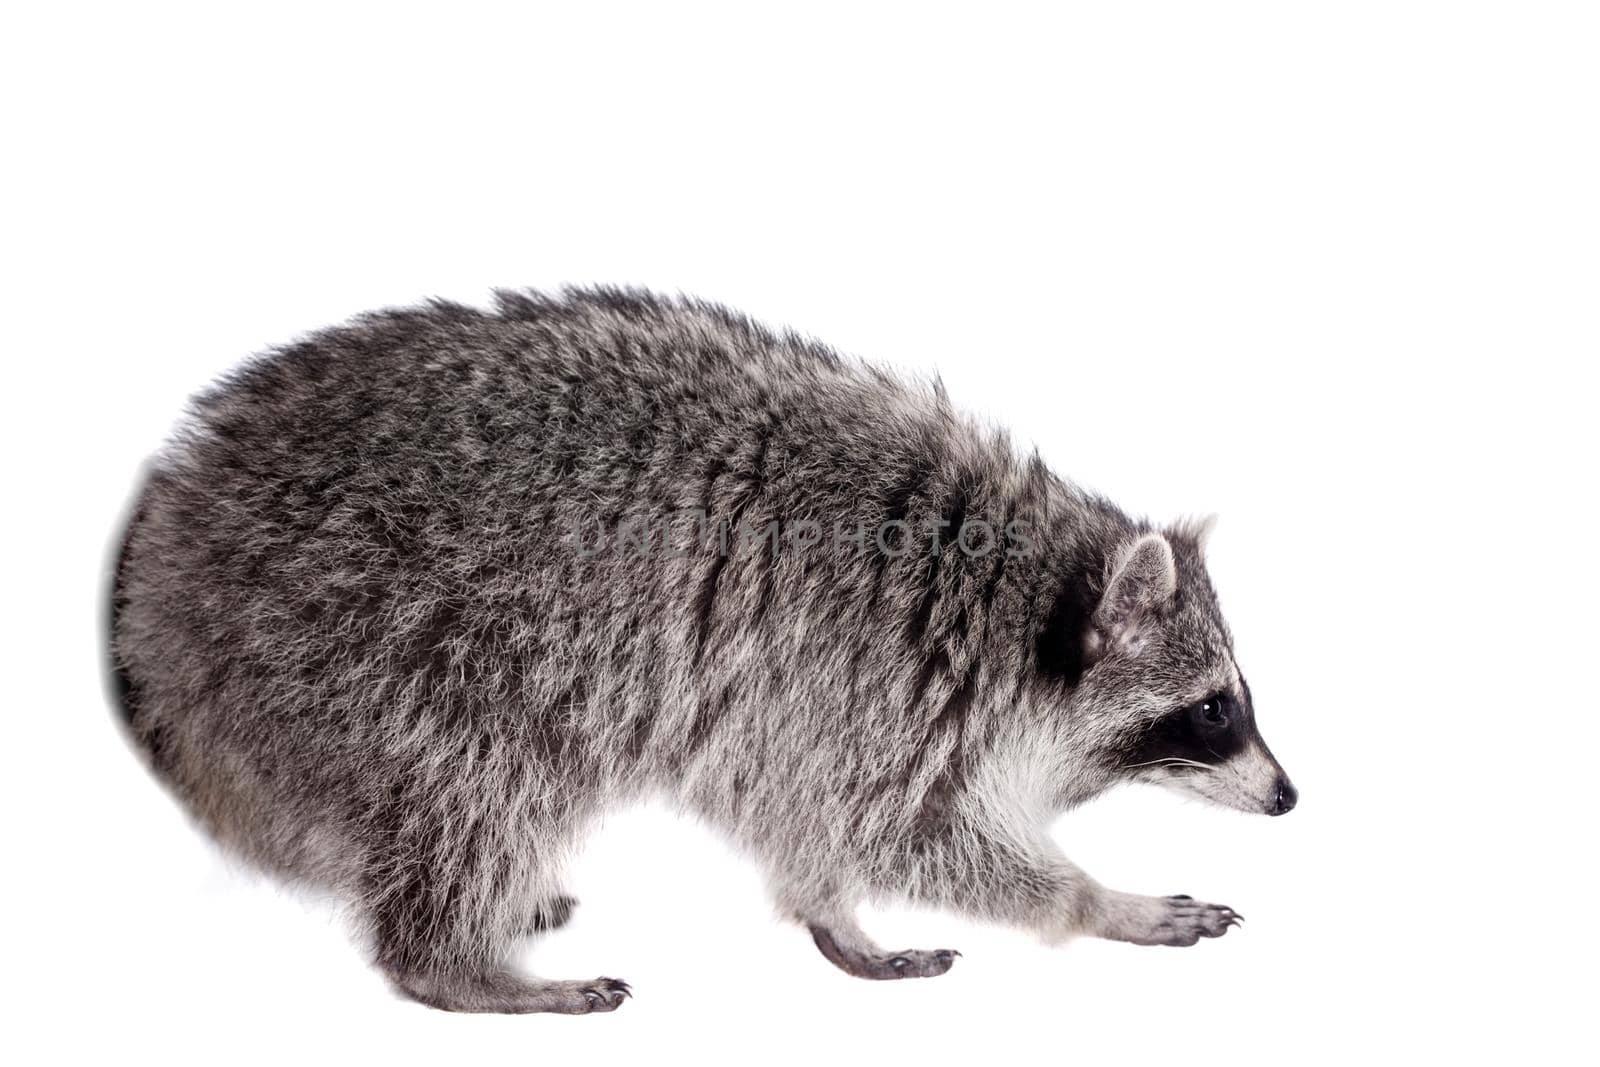 Raccoon, Procyon lotor, on the white background by RosaJay